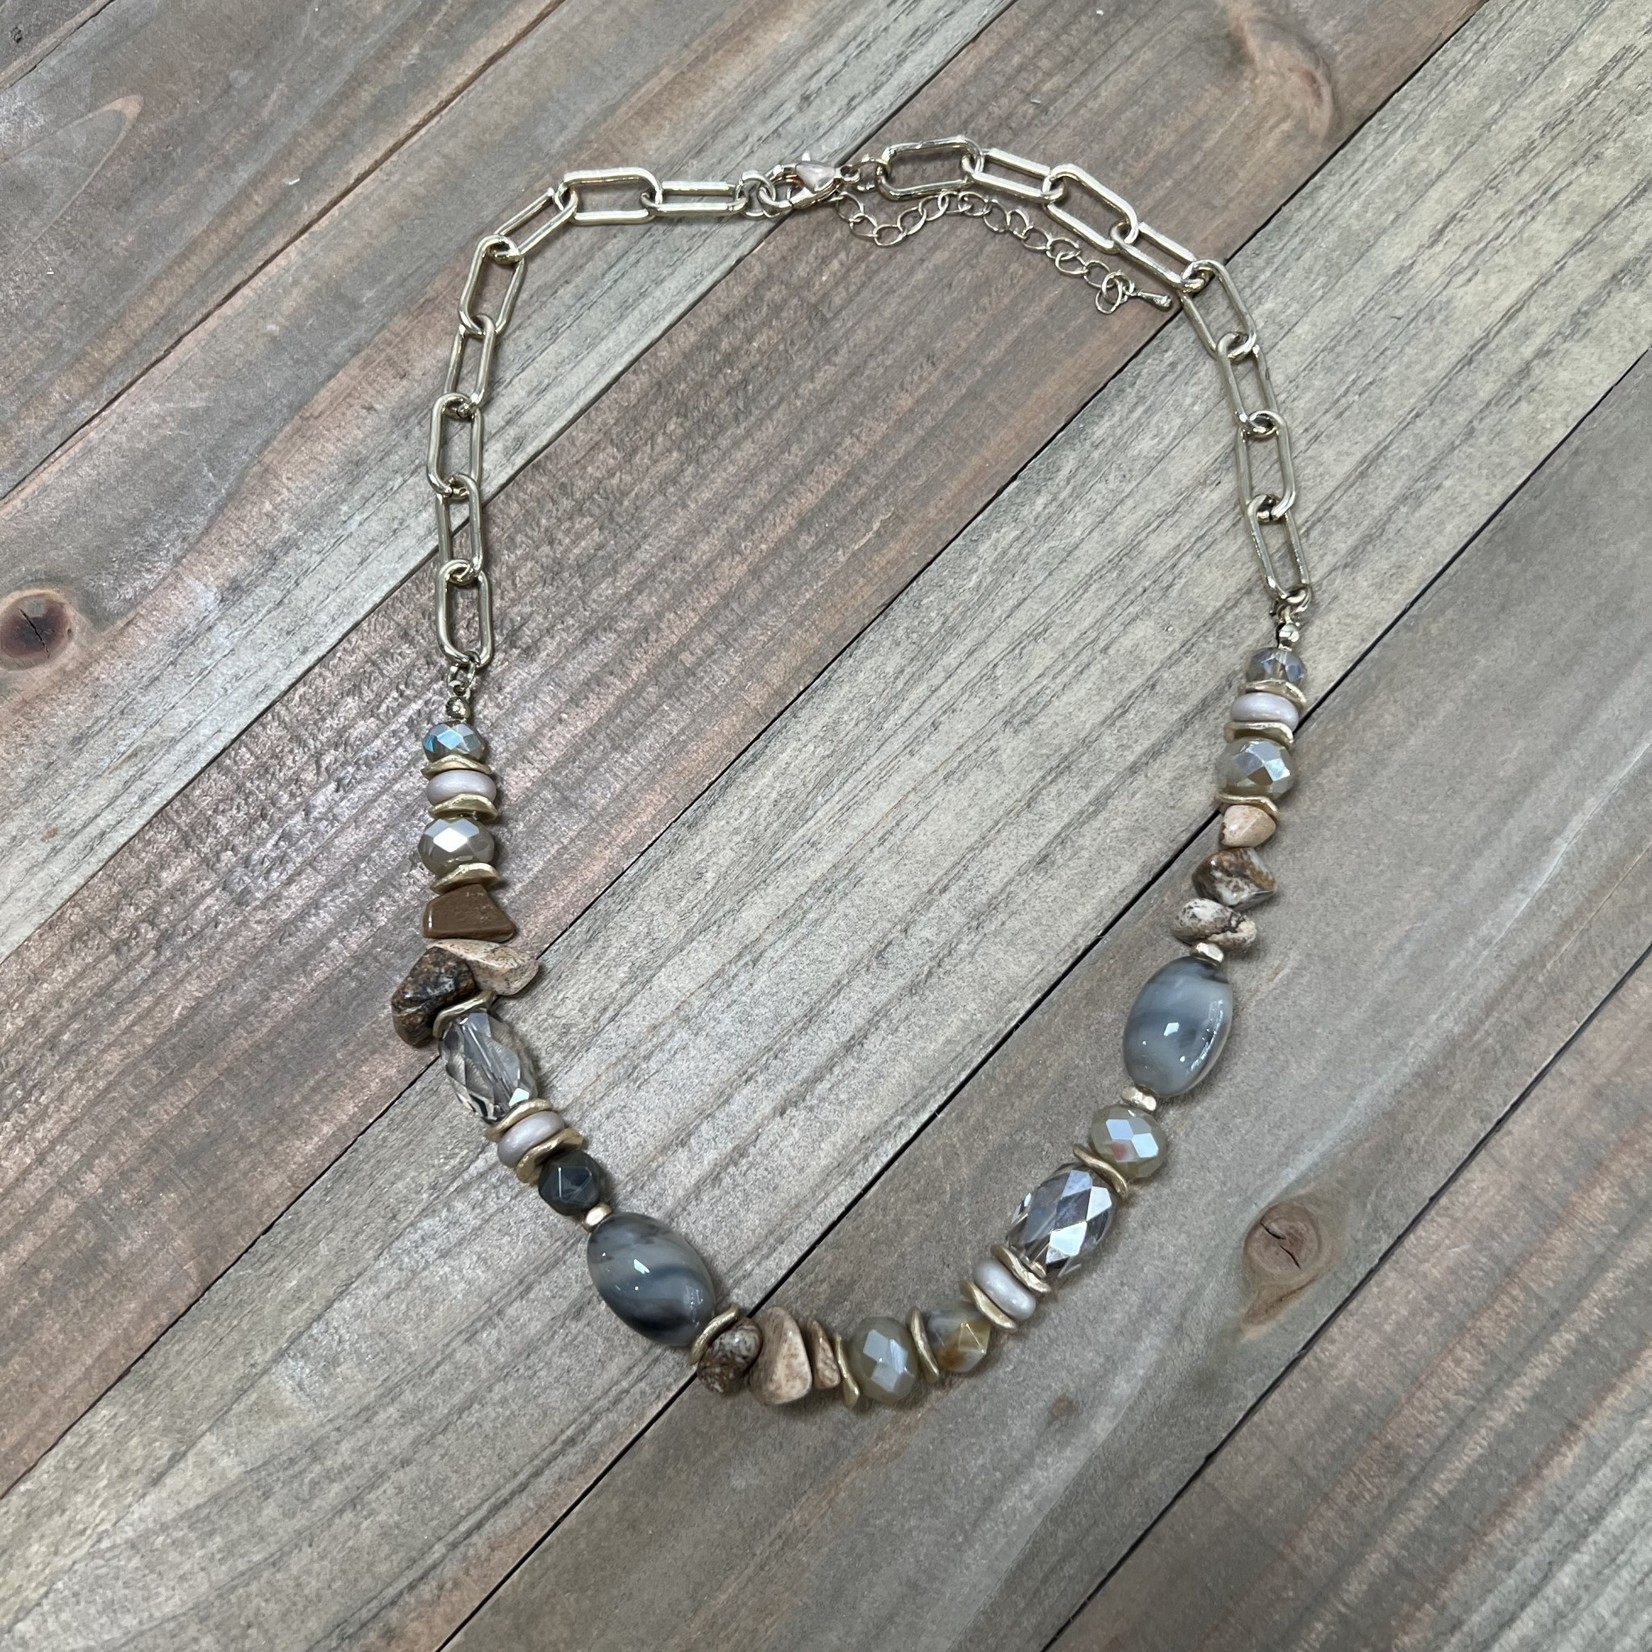 Stone and Bead Necklace